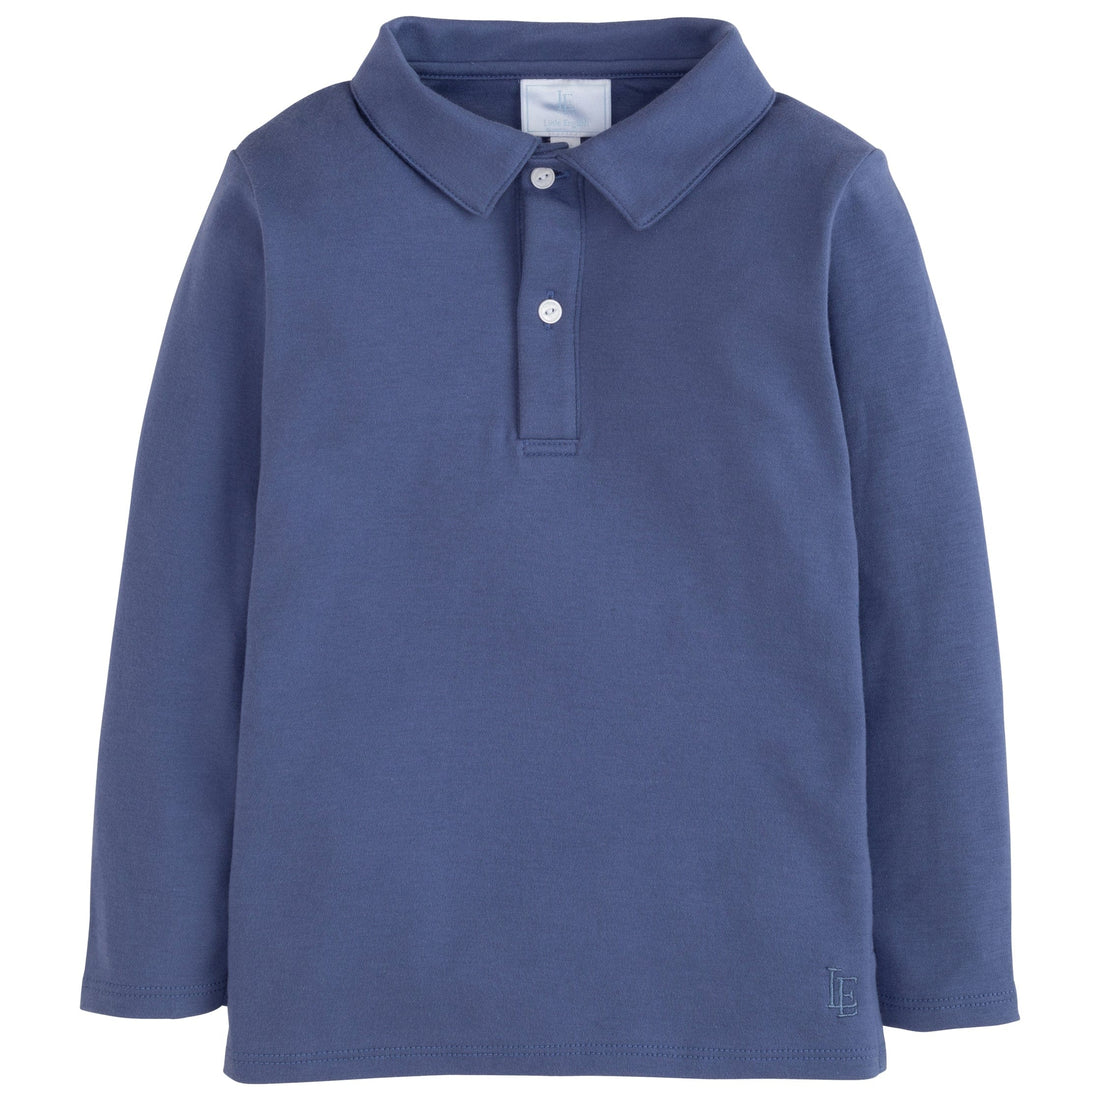 little english classic chidlrens clothing boys long sleeve gray/blue polo